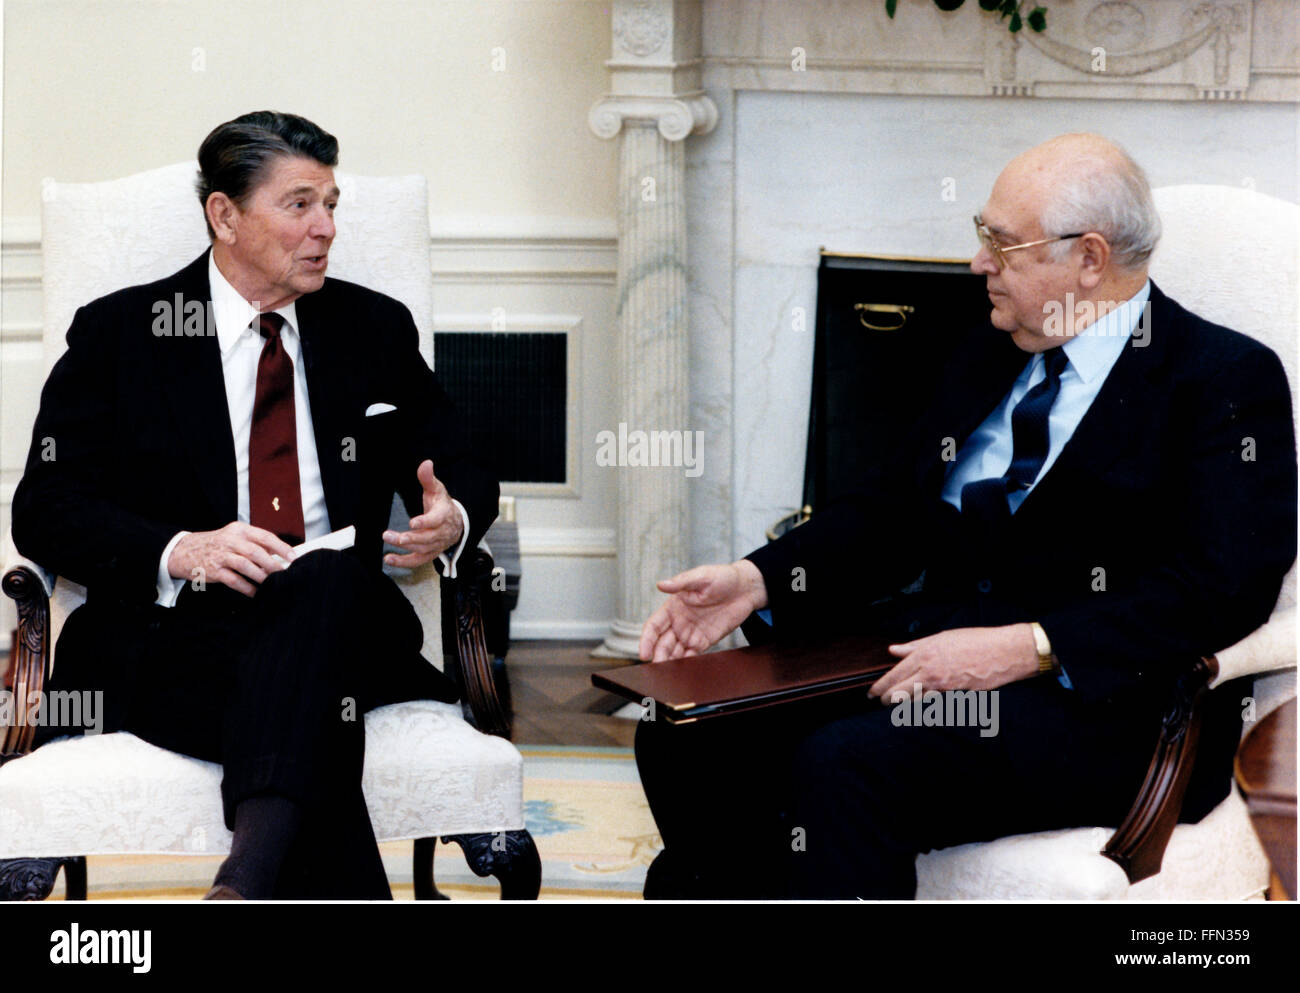 Washington, District of Columbia, USA. 11th Jan, 2010. United States President Ronald Reagan meets Ambassador Anatoly Fyodorovich Dobrynin of the Soviet Union in the Oval Office of the White House in Washington, DC on Tuesday, April 8, 1986. Mandatory Credit: Bill Fitz-Patrick - White House via CNP © Bill Fitz-Patrick/CNP/ZUMA Wire/Alamy Live News Stock Photo